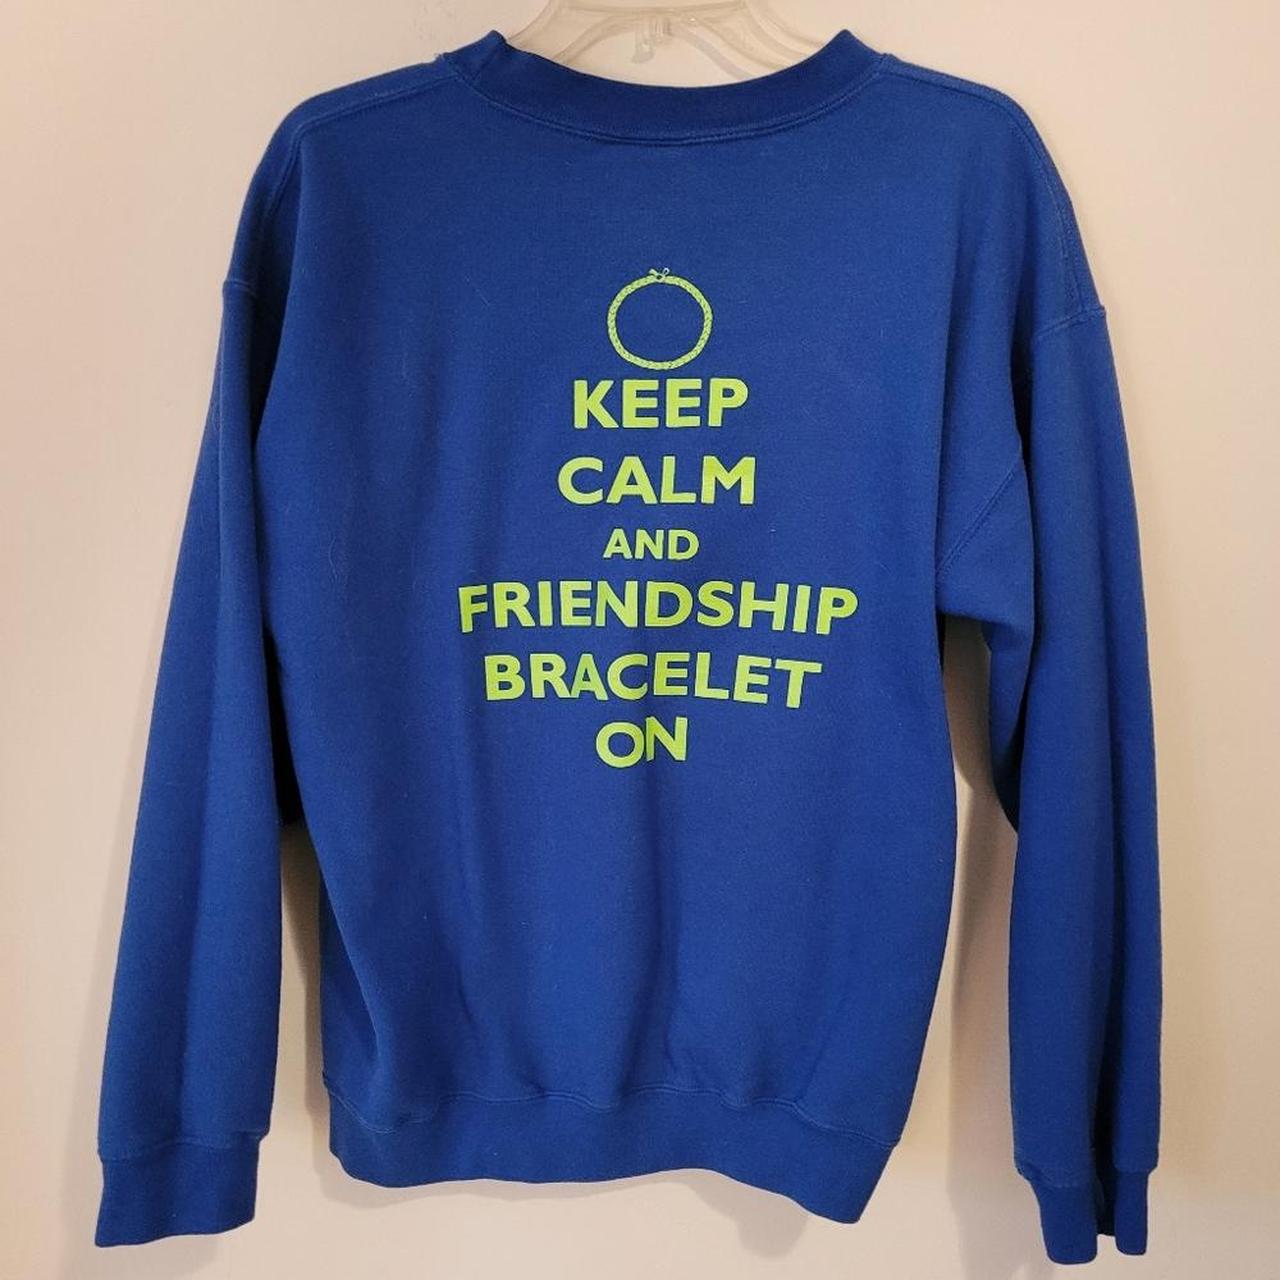 Product Image 2 - Friendship Bracelet Club Sweater
One of